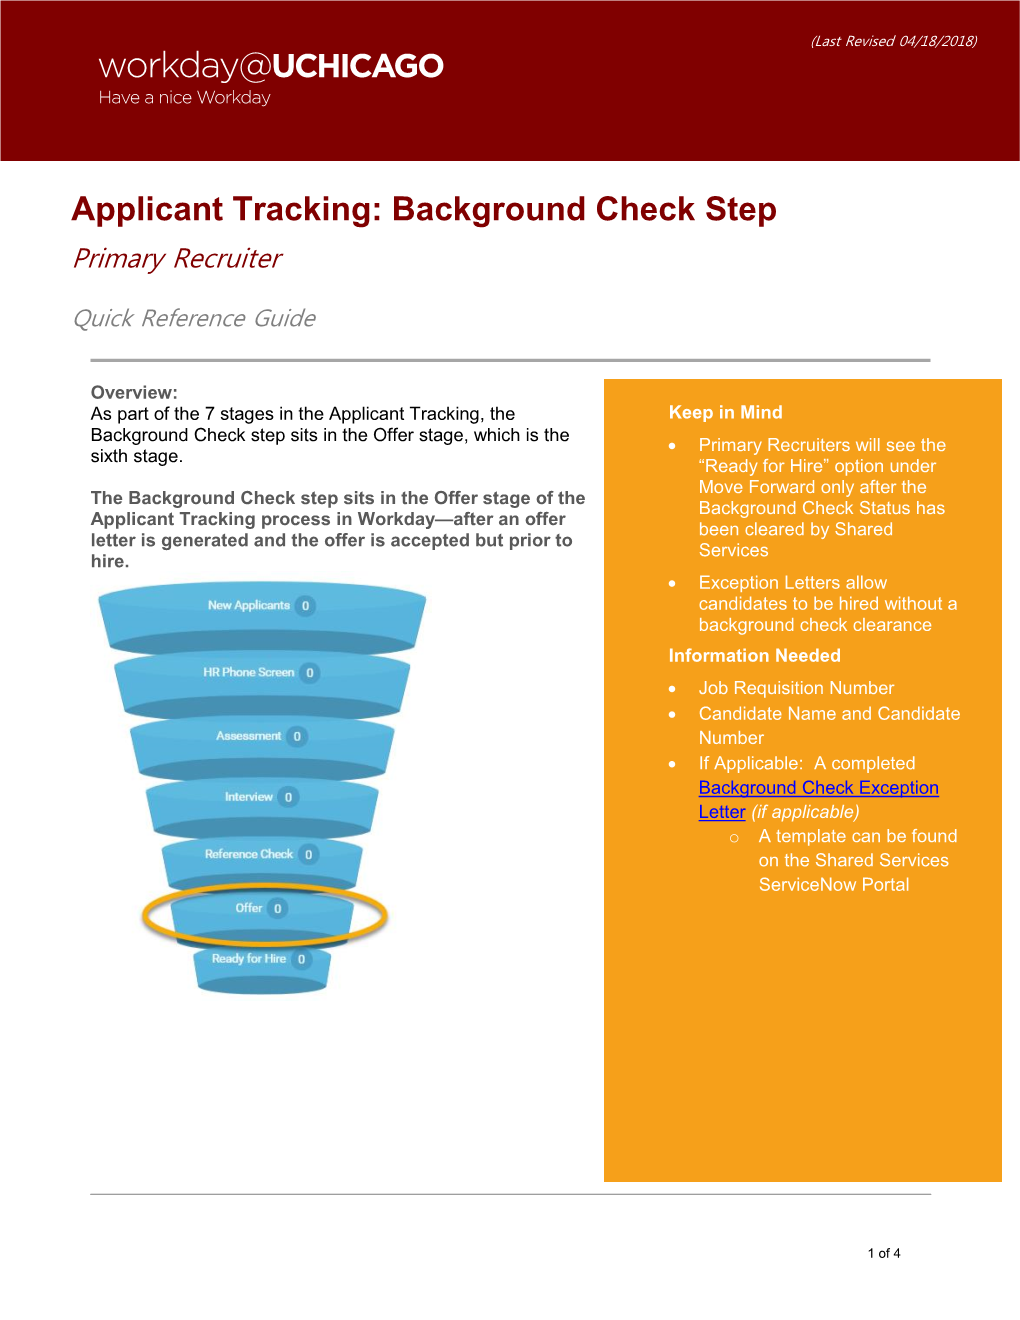 Applicant Tracking: Background Check Step